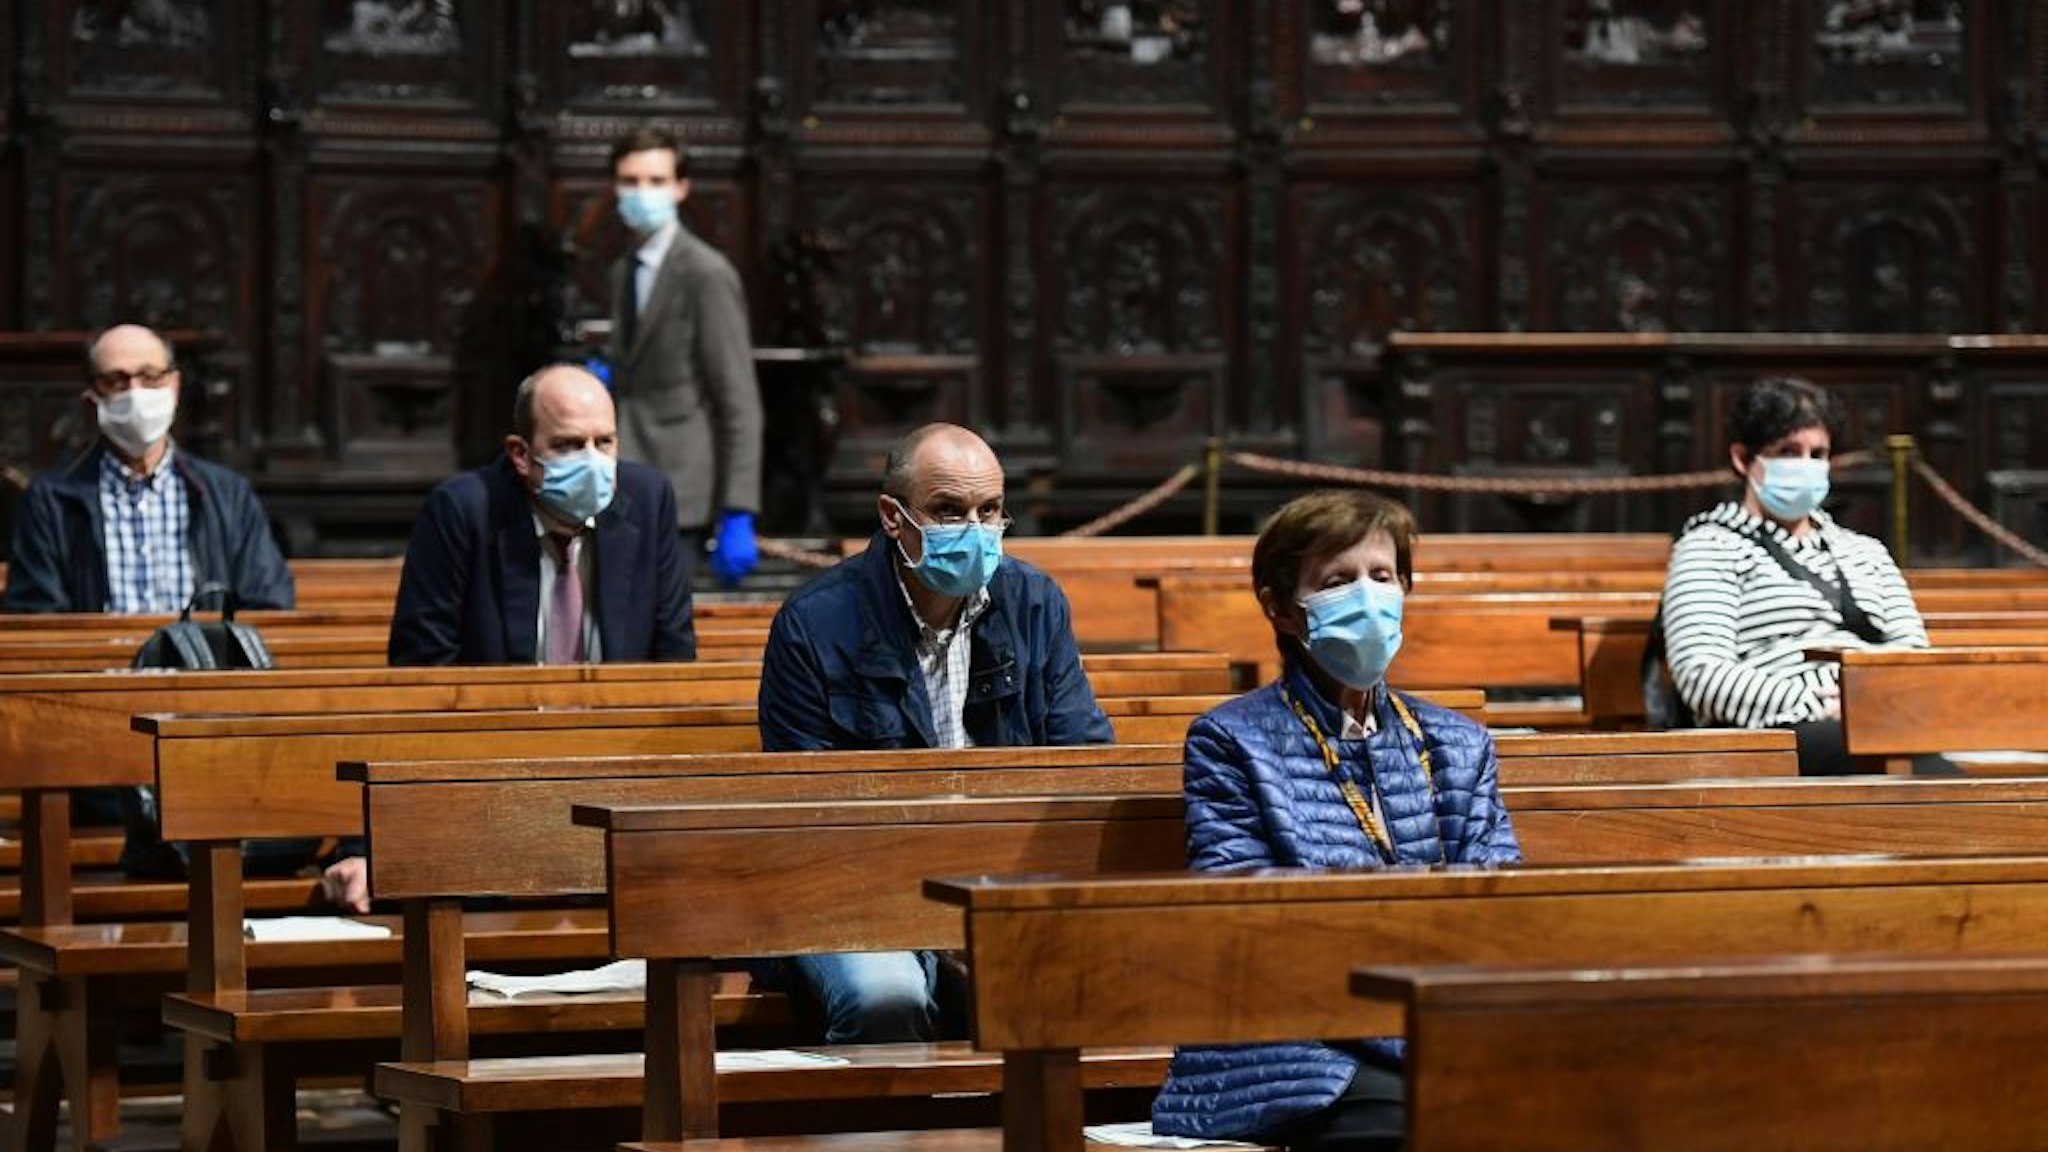 People attend a mass at the Cappella Feriale chapel of the Duomo cathedral in Milan on May 18, 2020 during the country's lockdown aimed at curbing the spread of the COVID-19 infection, caused by the novel coronavirus. - Restaurants and churches reopen in Italy on May 18, 2020 as part of a fresh wave of lockdown easing in Europe and the country's latest step in a cautious, gradual return to normality, allowing businesses and churches to reopen after a two-month lockdown. (Photo by Miguel MEDINA / AFP) (Photo by MIGUEL MEDINA/AFP via Getty Images)